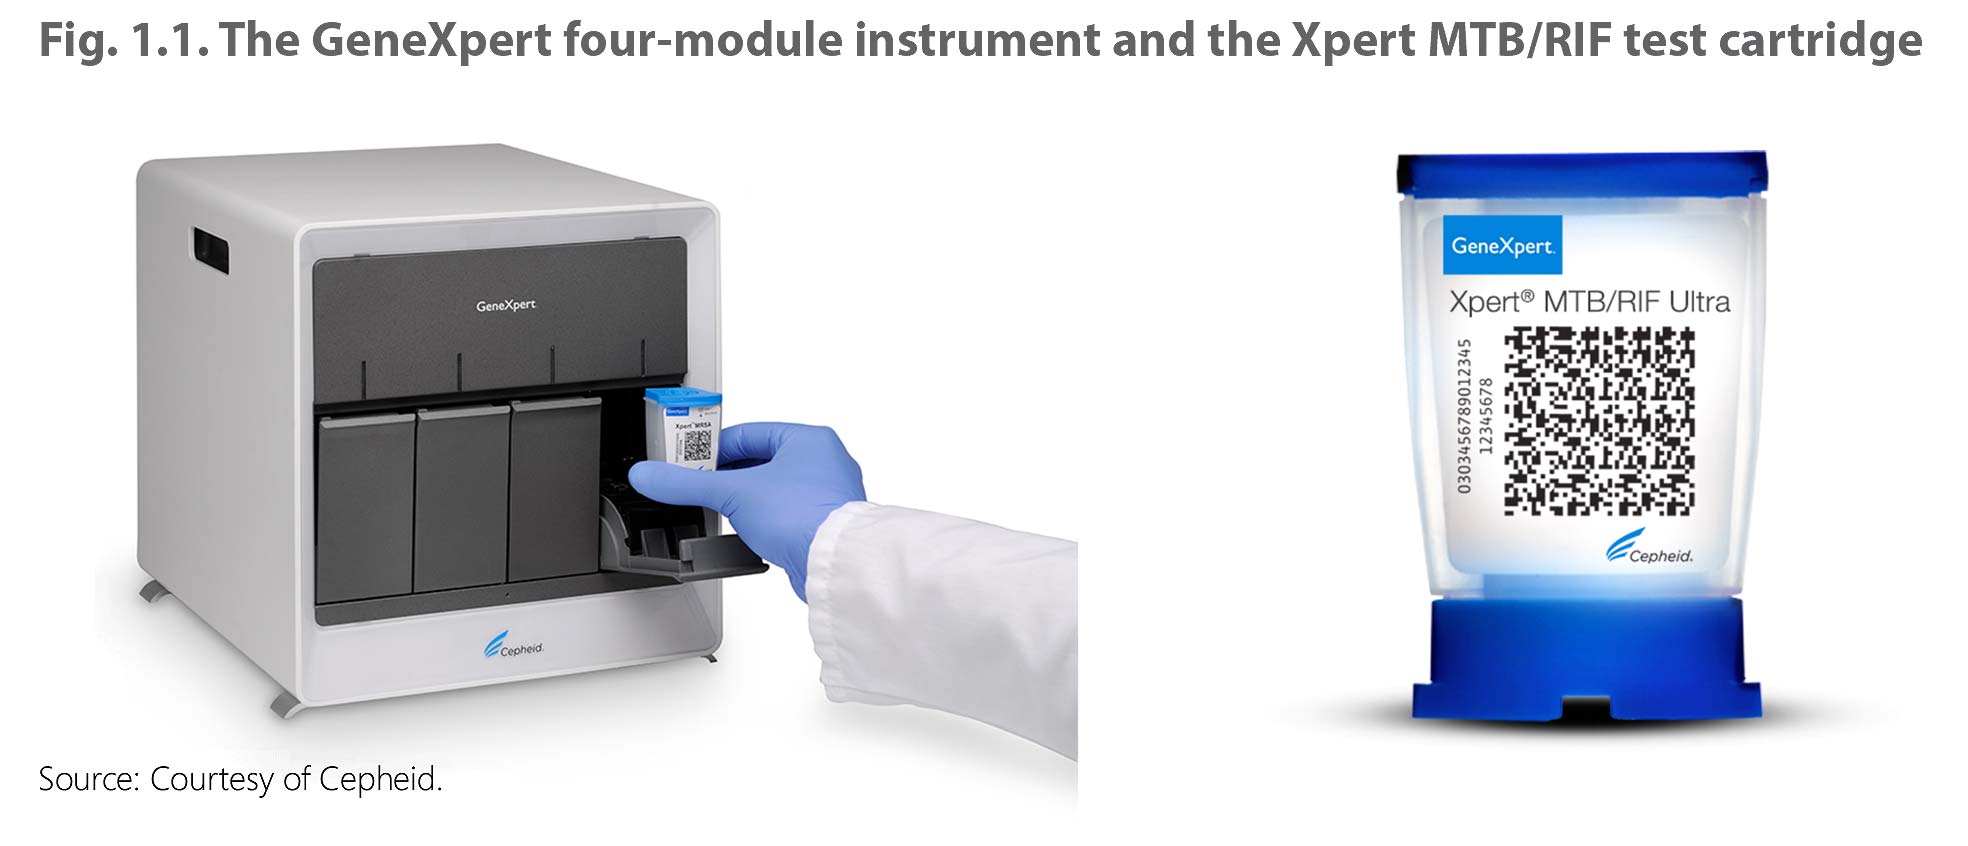  The GeneXpert four-module instrument and the Xpert MTB/RIF test  cartridge